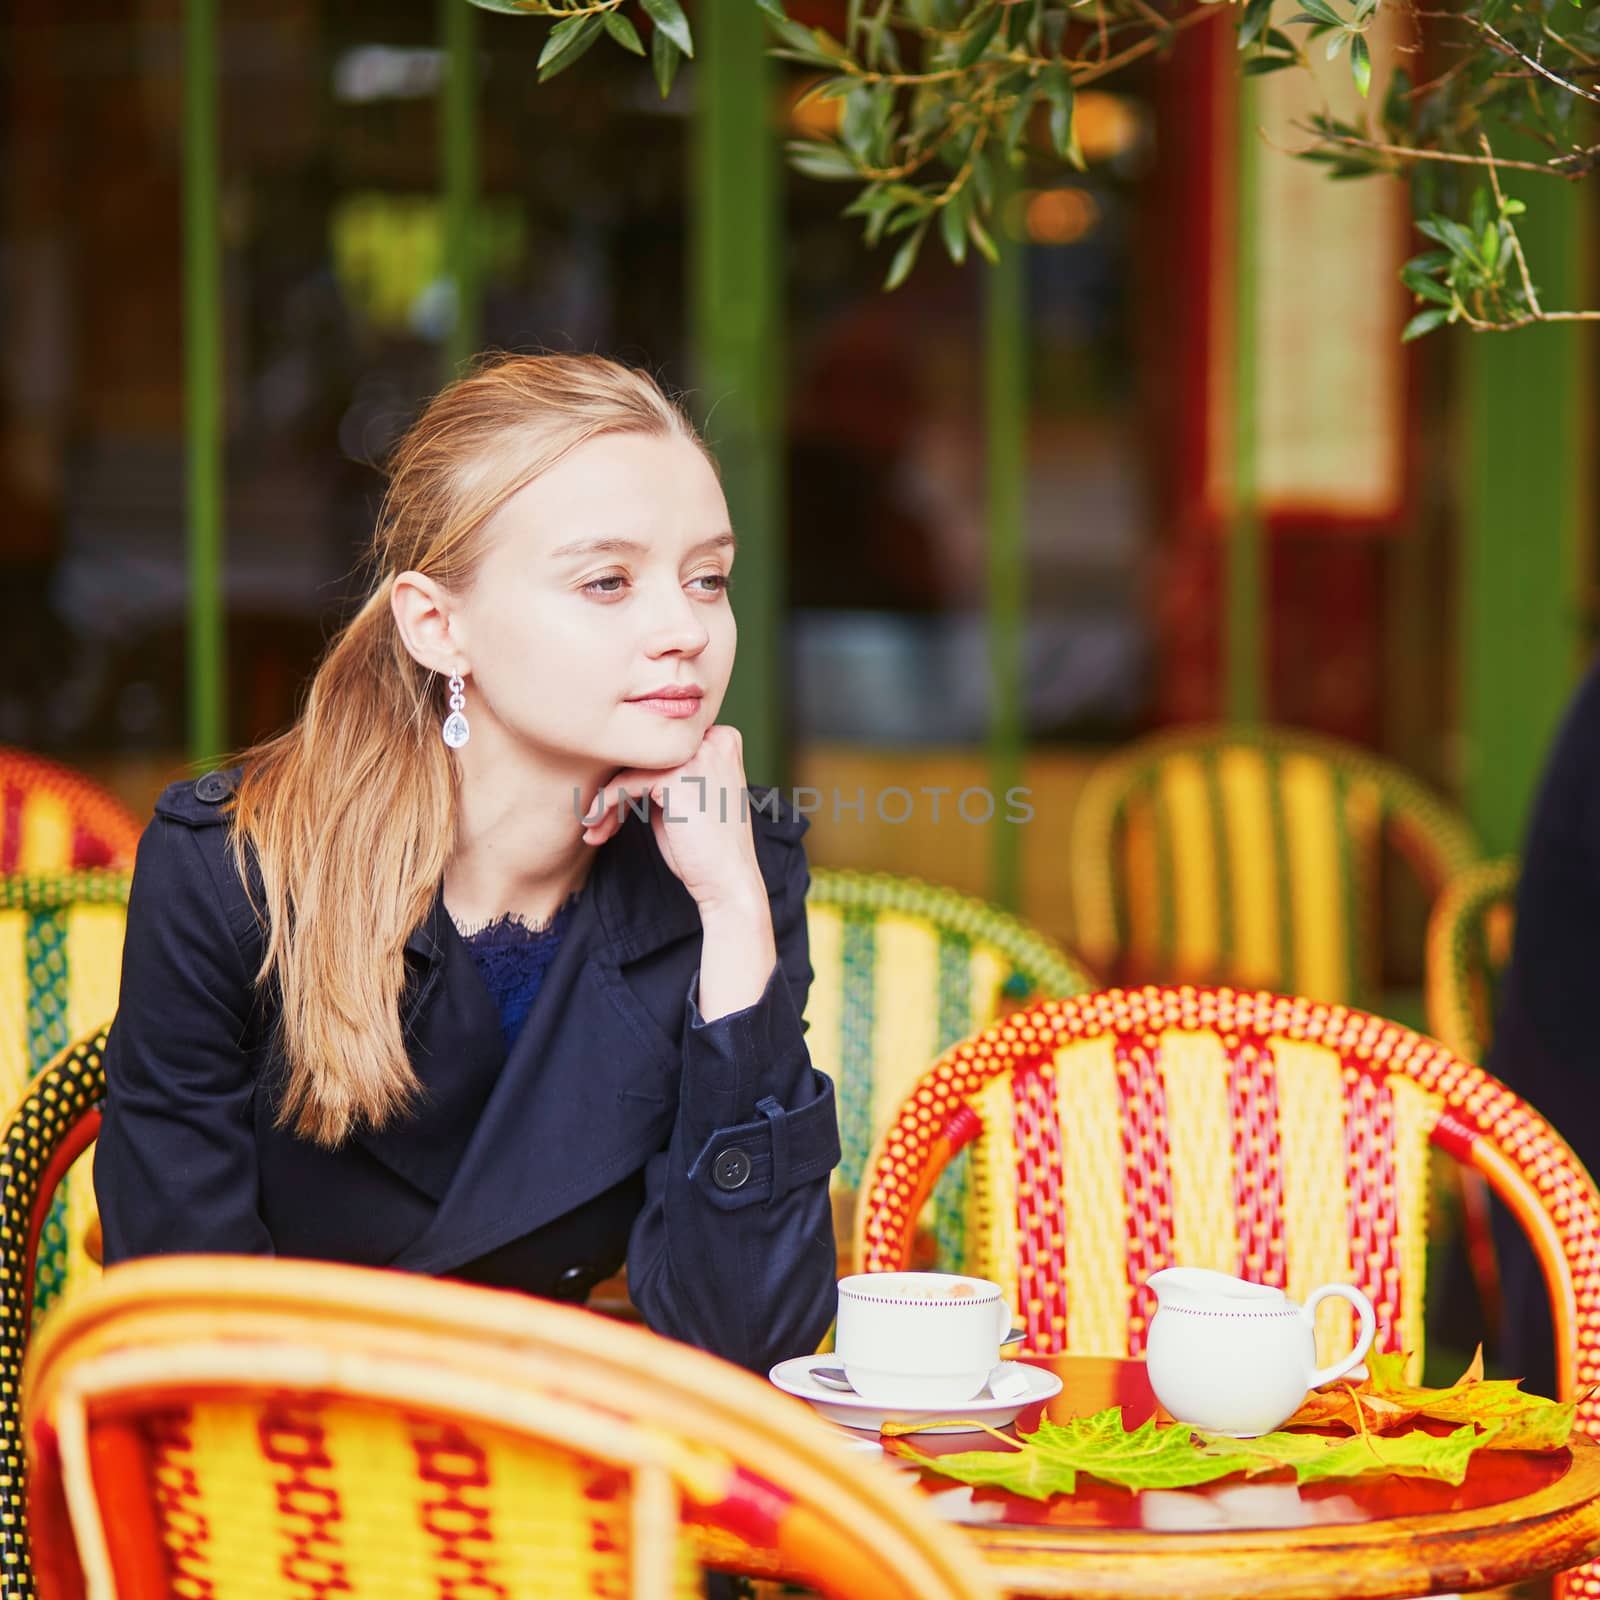 Woman drinking coffee and eating delicious fresh croissant in Parisian outdoor cafe by jaspe